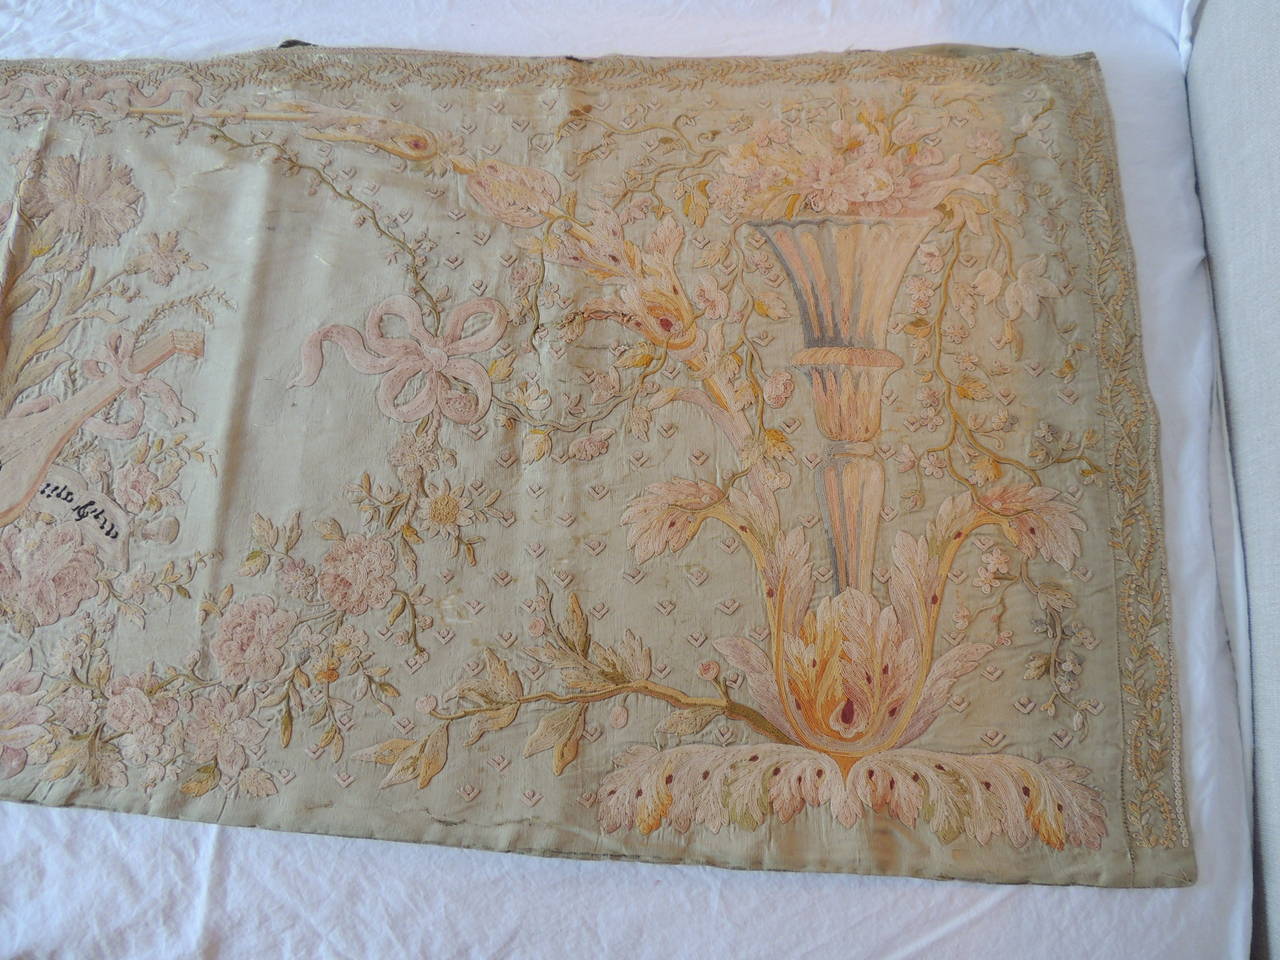 Embroidery panel depicting music instrument in the center medallion and blooming flowers all-around. Silk and linen on silk background textile. Soft shades of green, yellows, pink and brown.